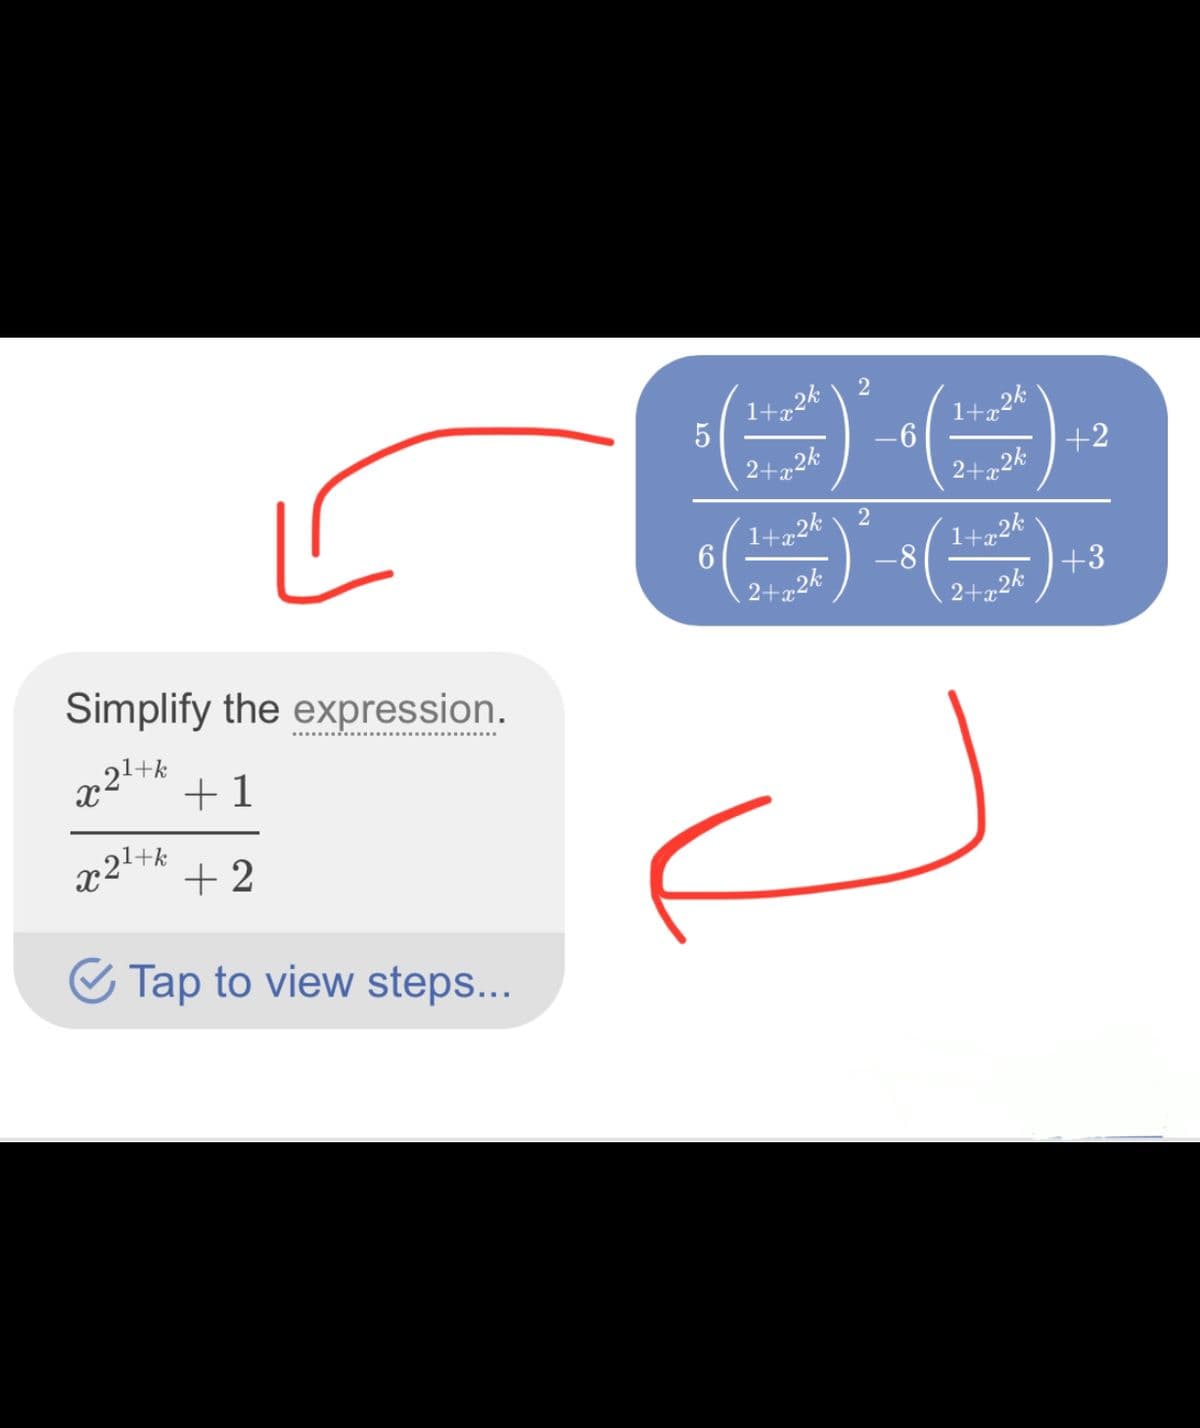 1+,2k
1+x-
-6
2+x
„2k
+2
2+x
1+x2k
6.
„2k
+3
1+x²
-8
2+2k
2+2k
Simplify the expression.
+1
+ 2
Tap to view steps...
